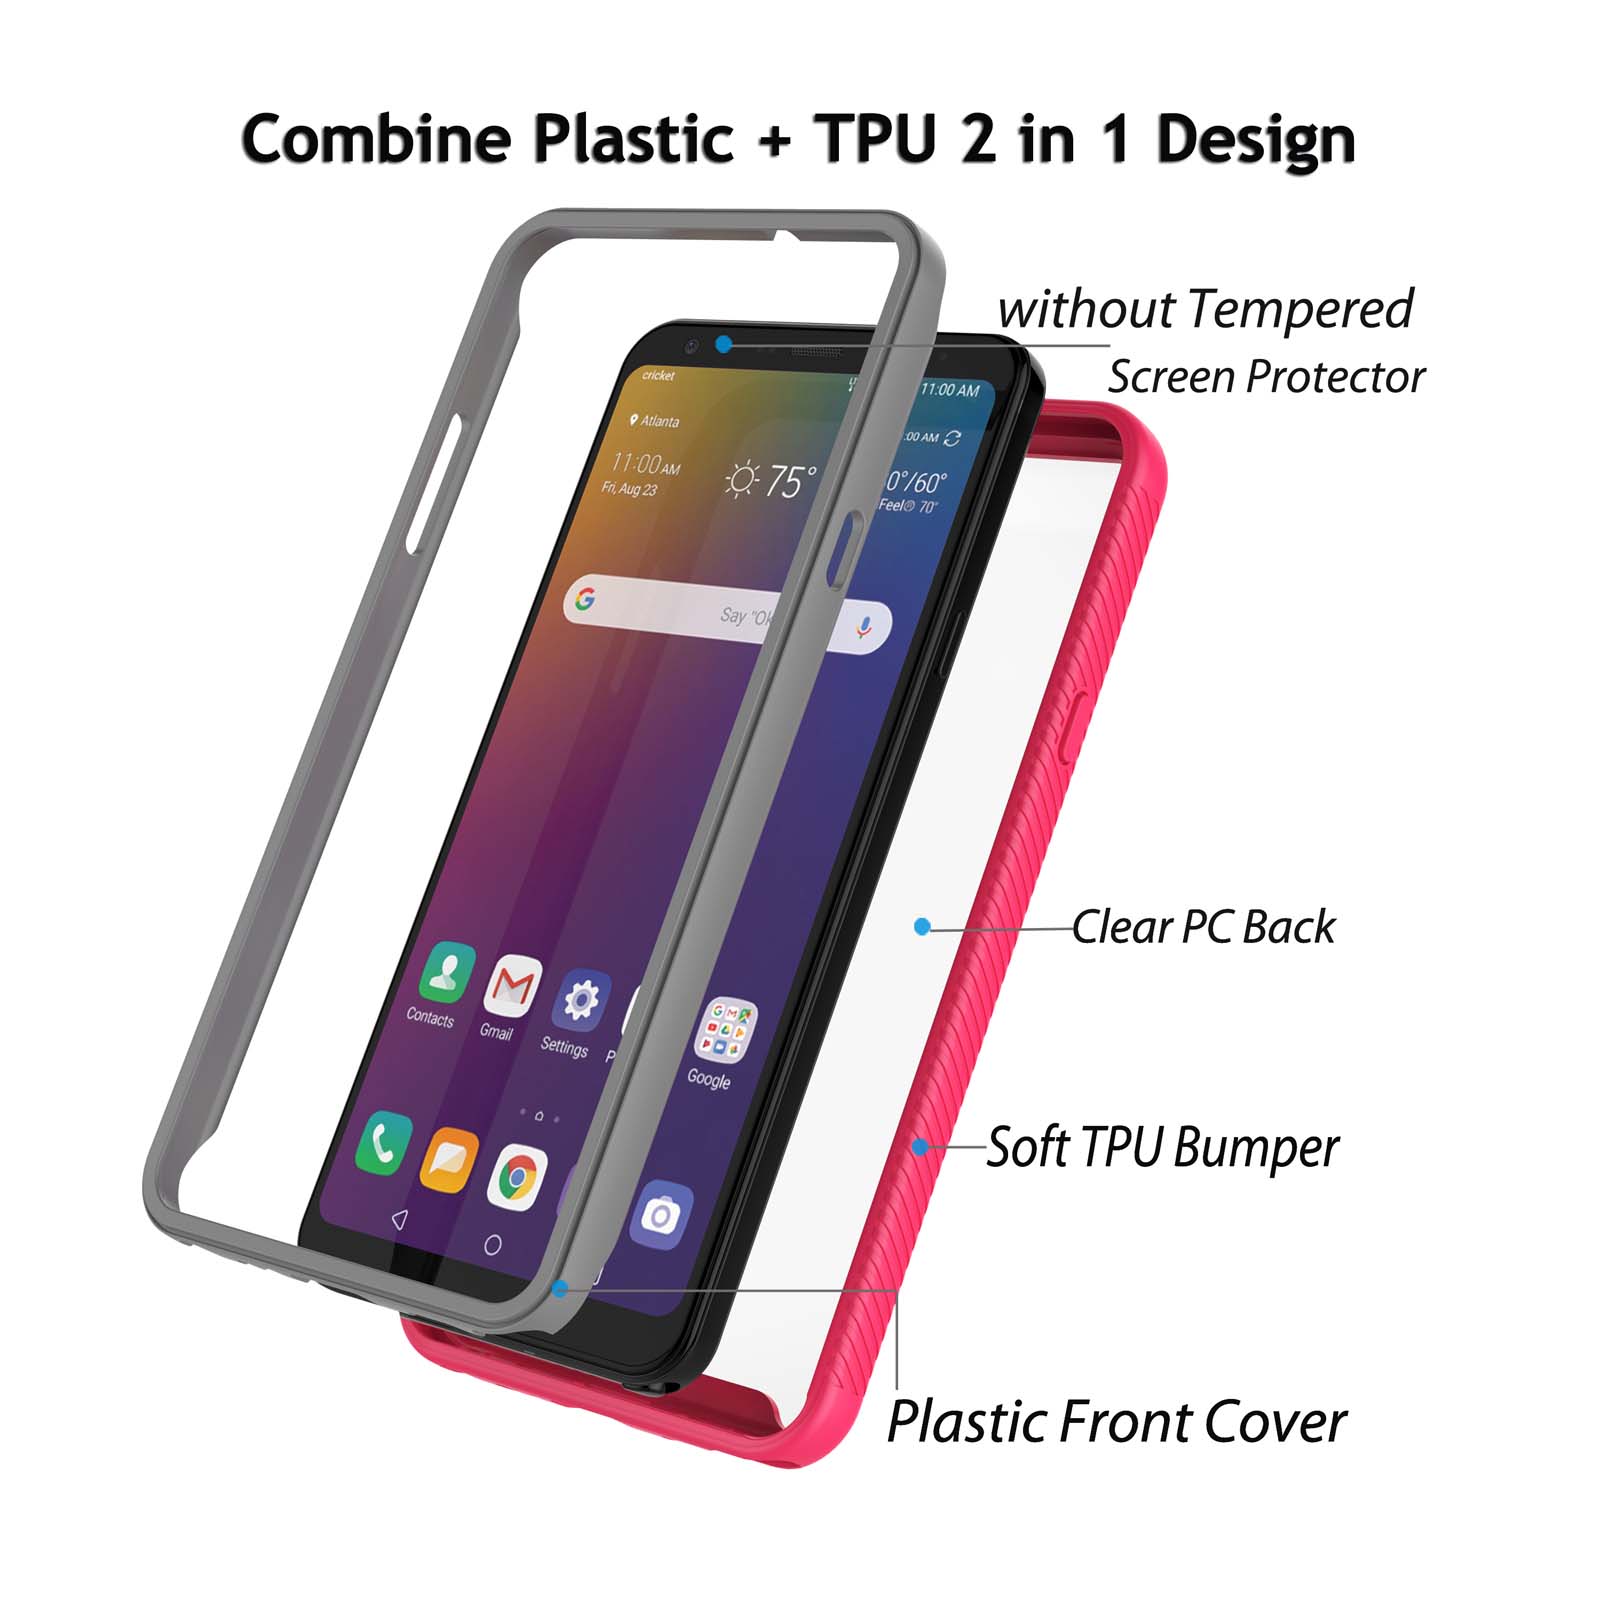 LG Stylo 6 Case, Sturdy Case for 2020 LG Stylo 6, Njjex Full-Body Rugged Transparent Clear Back Bumper Case Cover for LG Stylo 6 6.8" 2020 Not LG Stylo 5 6.2" -Hot Pink - image 3 of 10